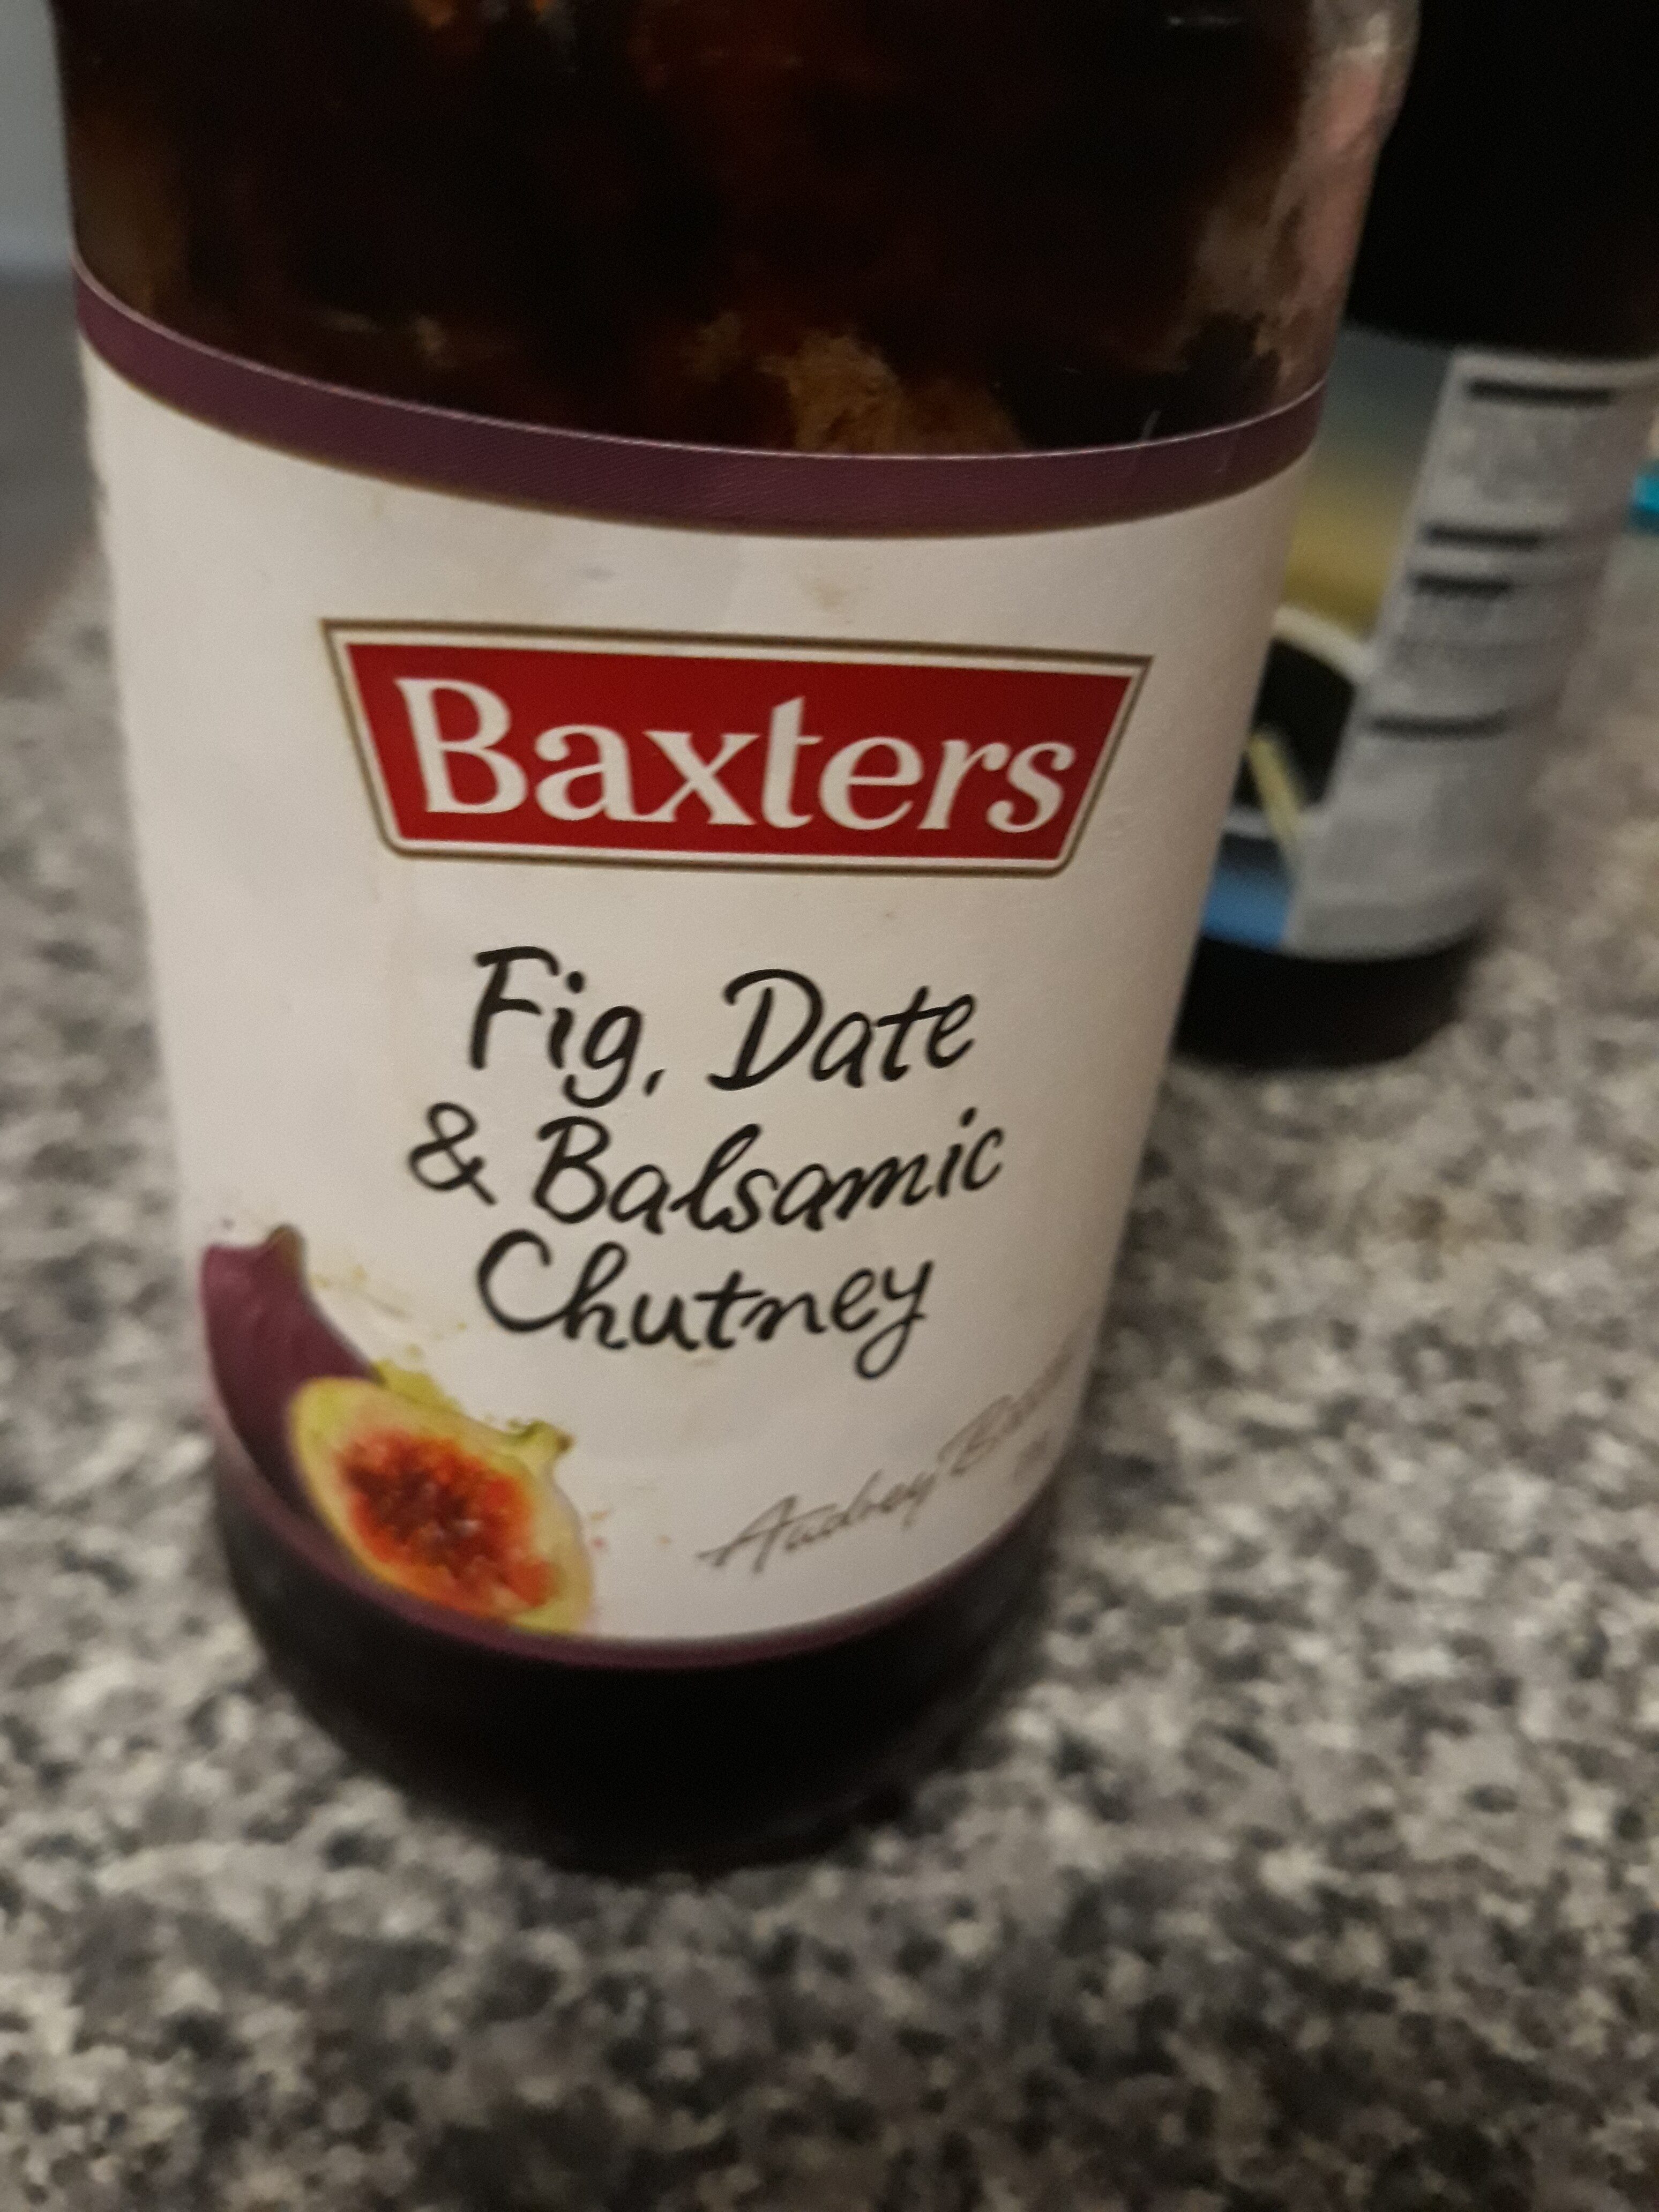 fig date and balsamic chutney - Product